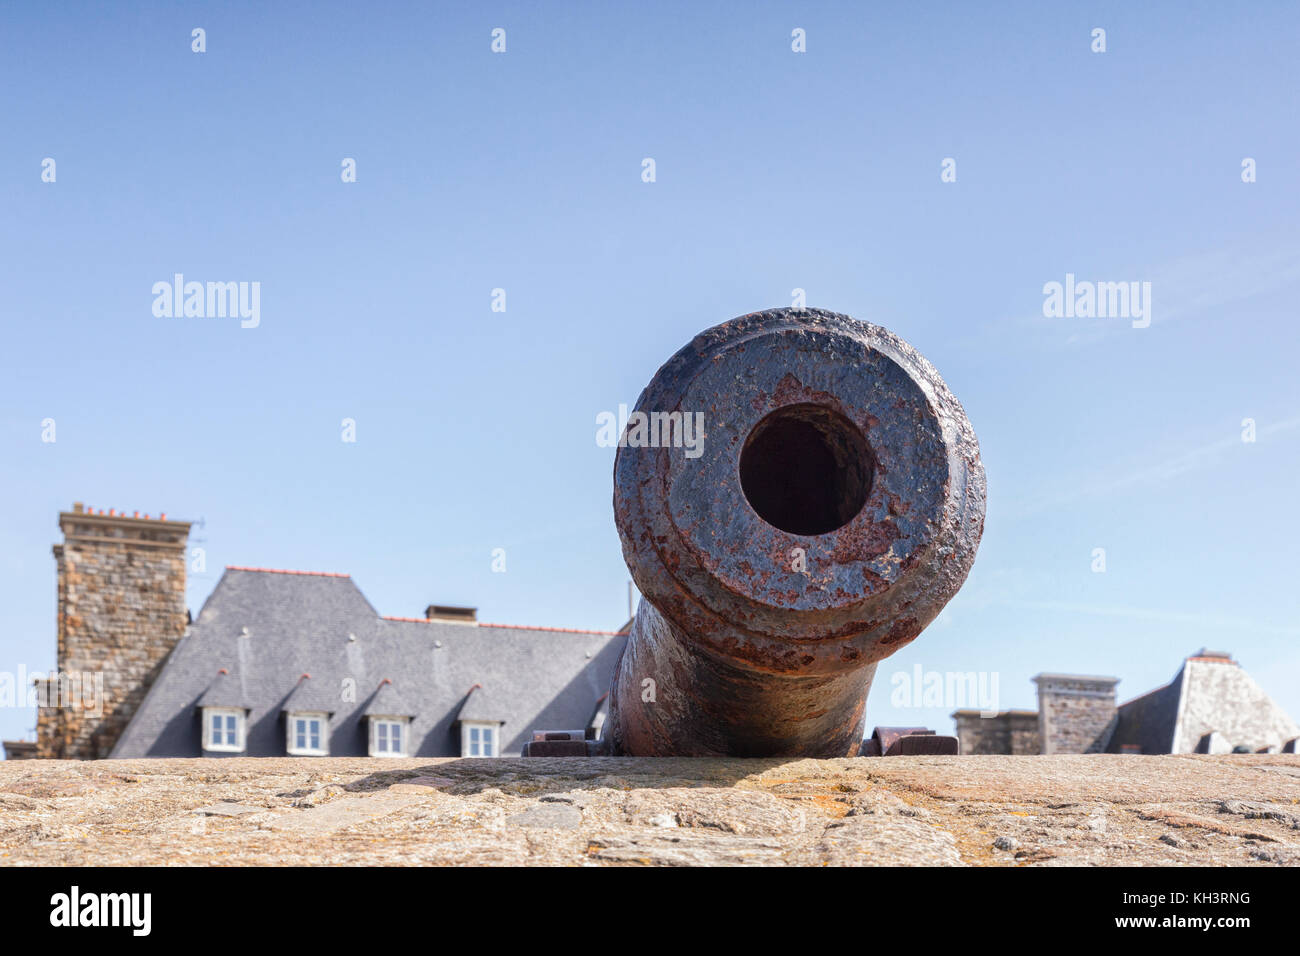 Cannon peeping over the ramparts at Saint Malo, Brittany, France. Stock Photo